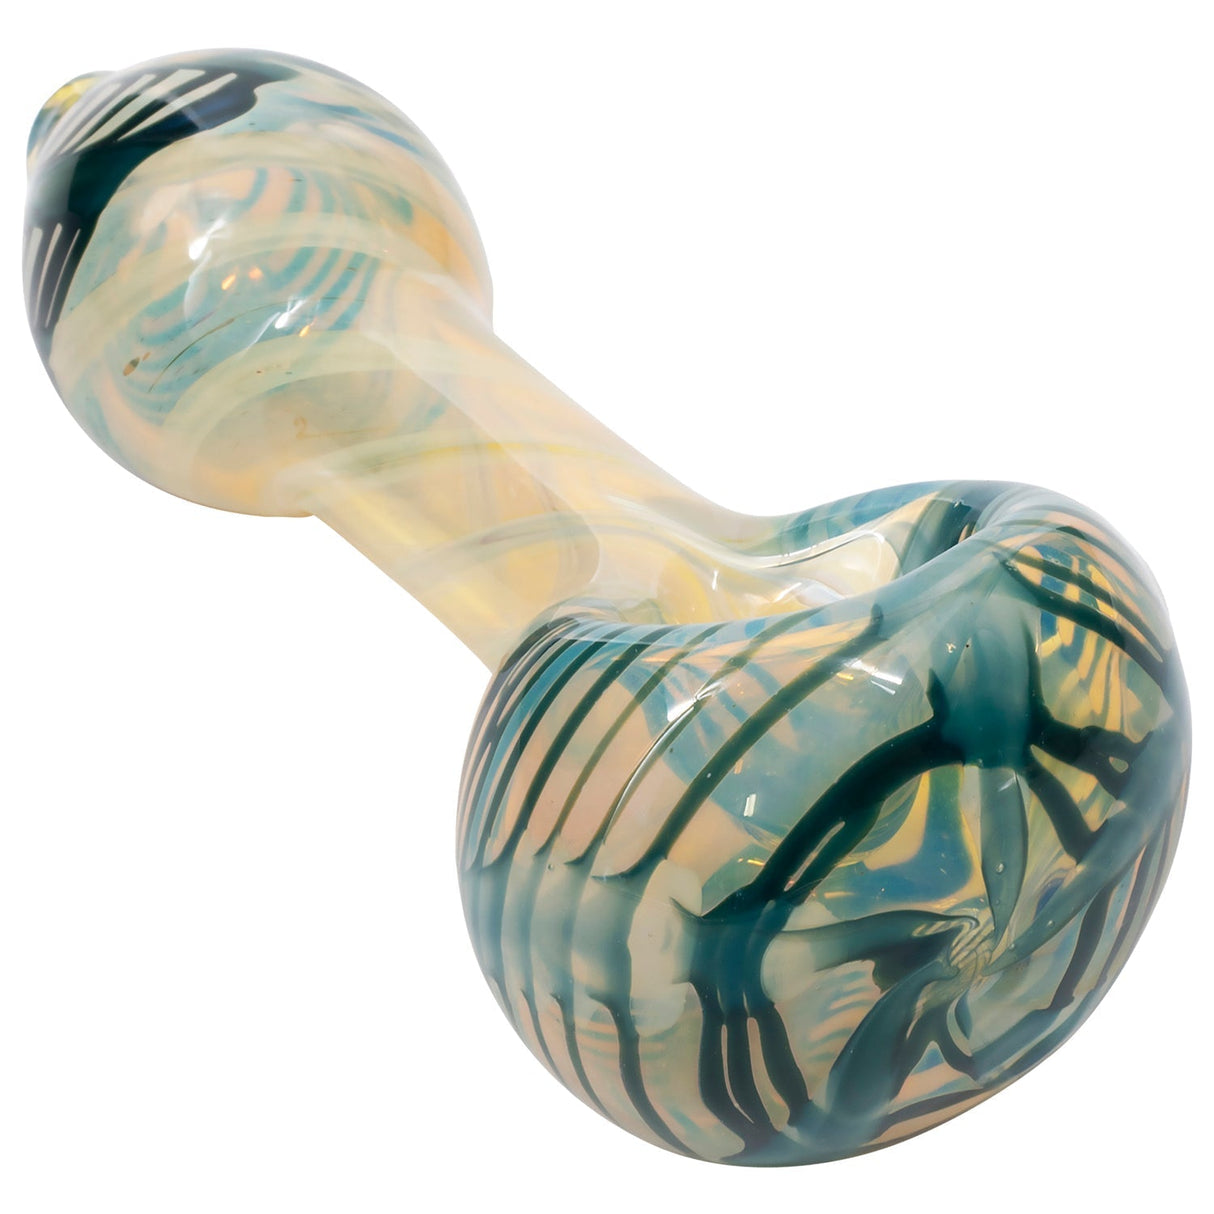 LA Pipes Twisty Cane Spoon Glass Pipe in Assorted Colors, Borosilicate, Side View